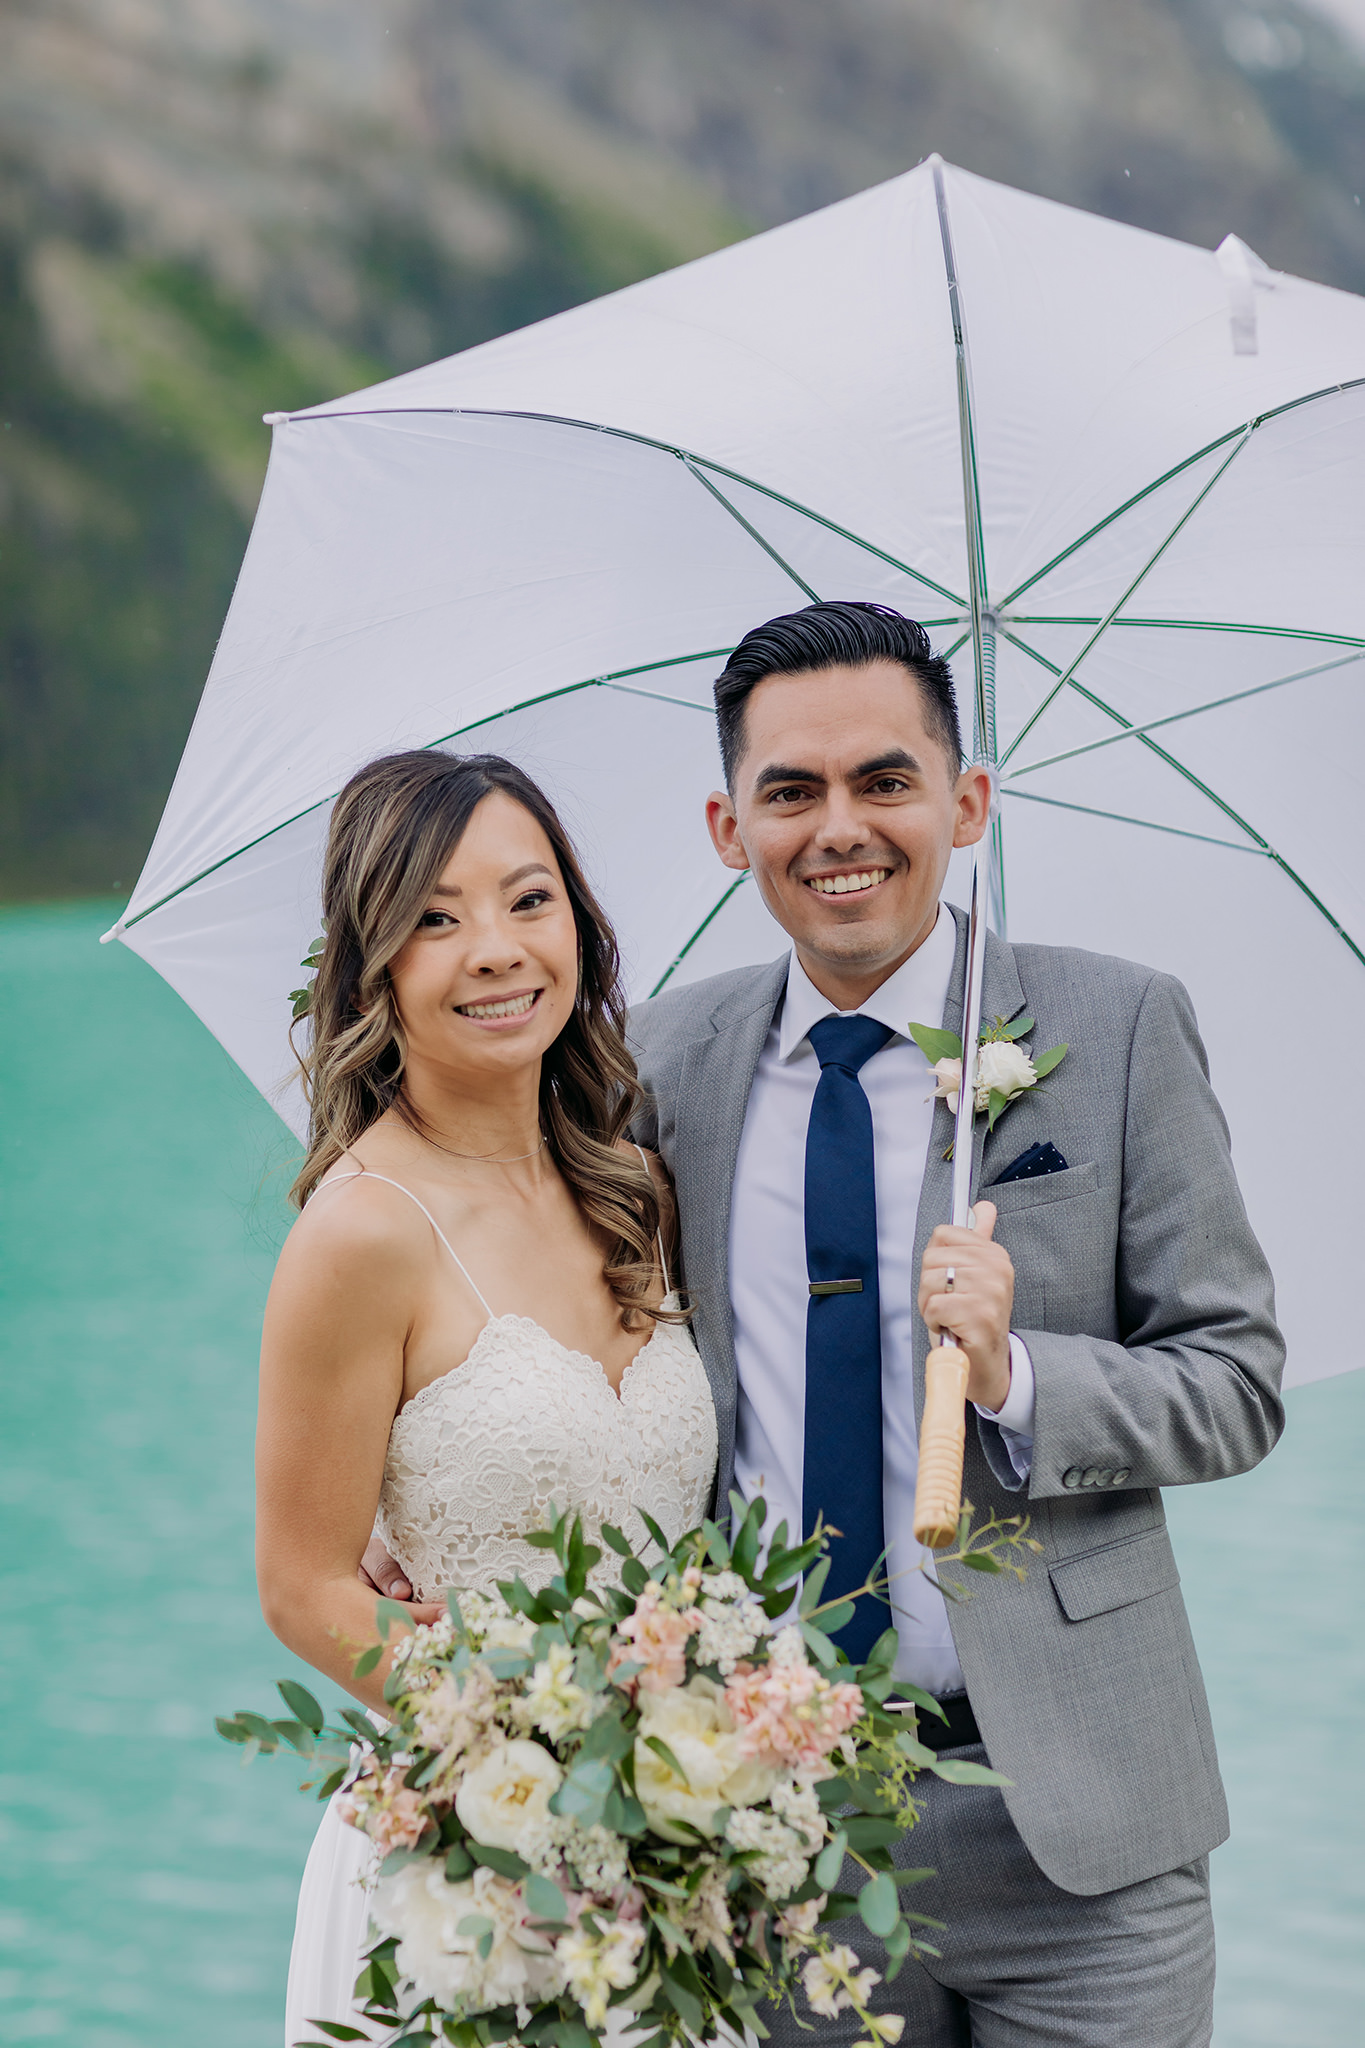 Lake Louise lakeshore wedding ceremony photographed by elopement photographer ENV Photography